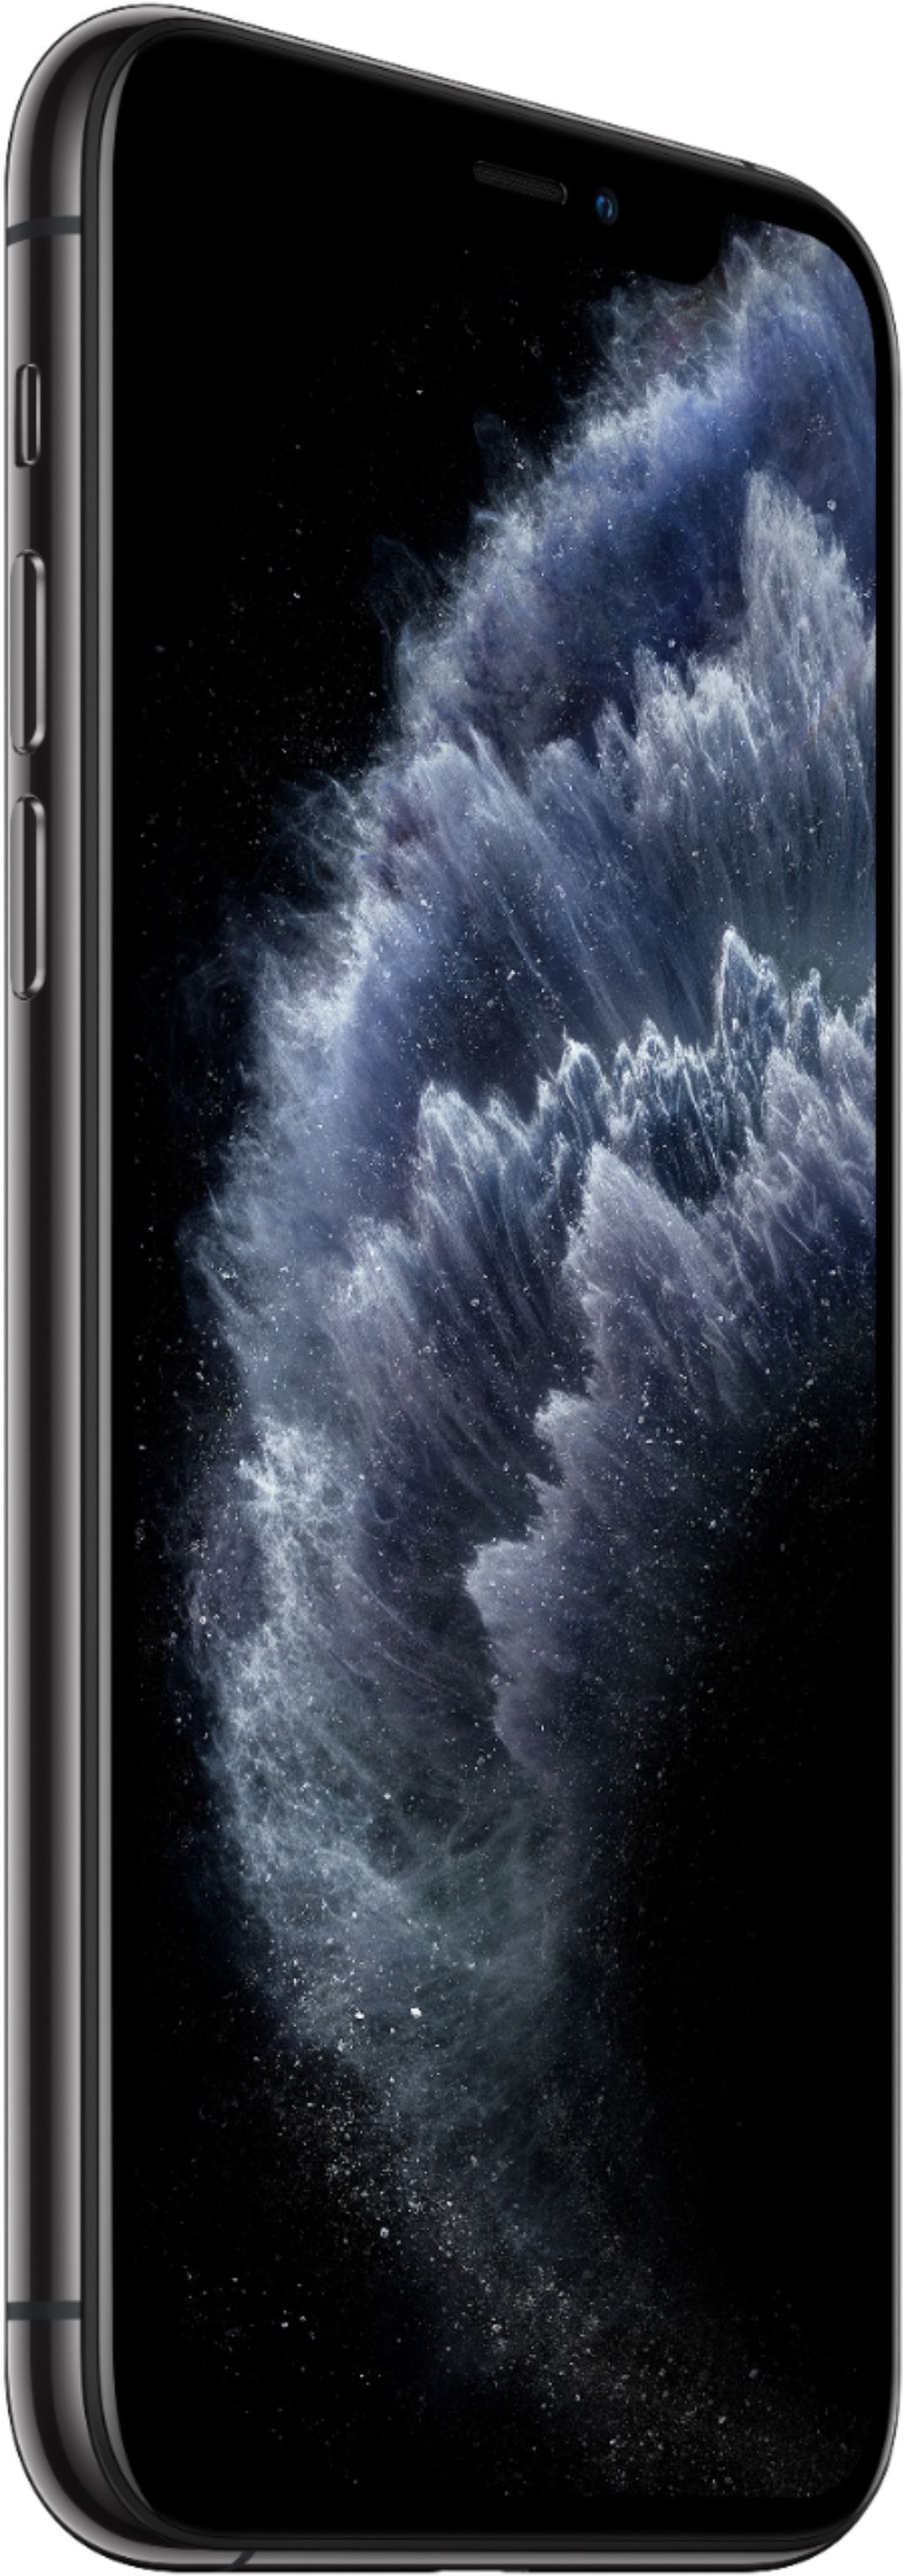 Best Buy: Apple iPhone 11 Pro 64GB Space Gray (Sprint) MWCH2LL/A